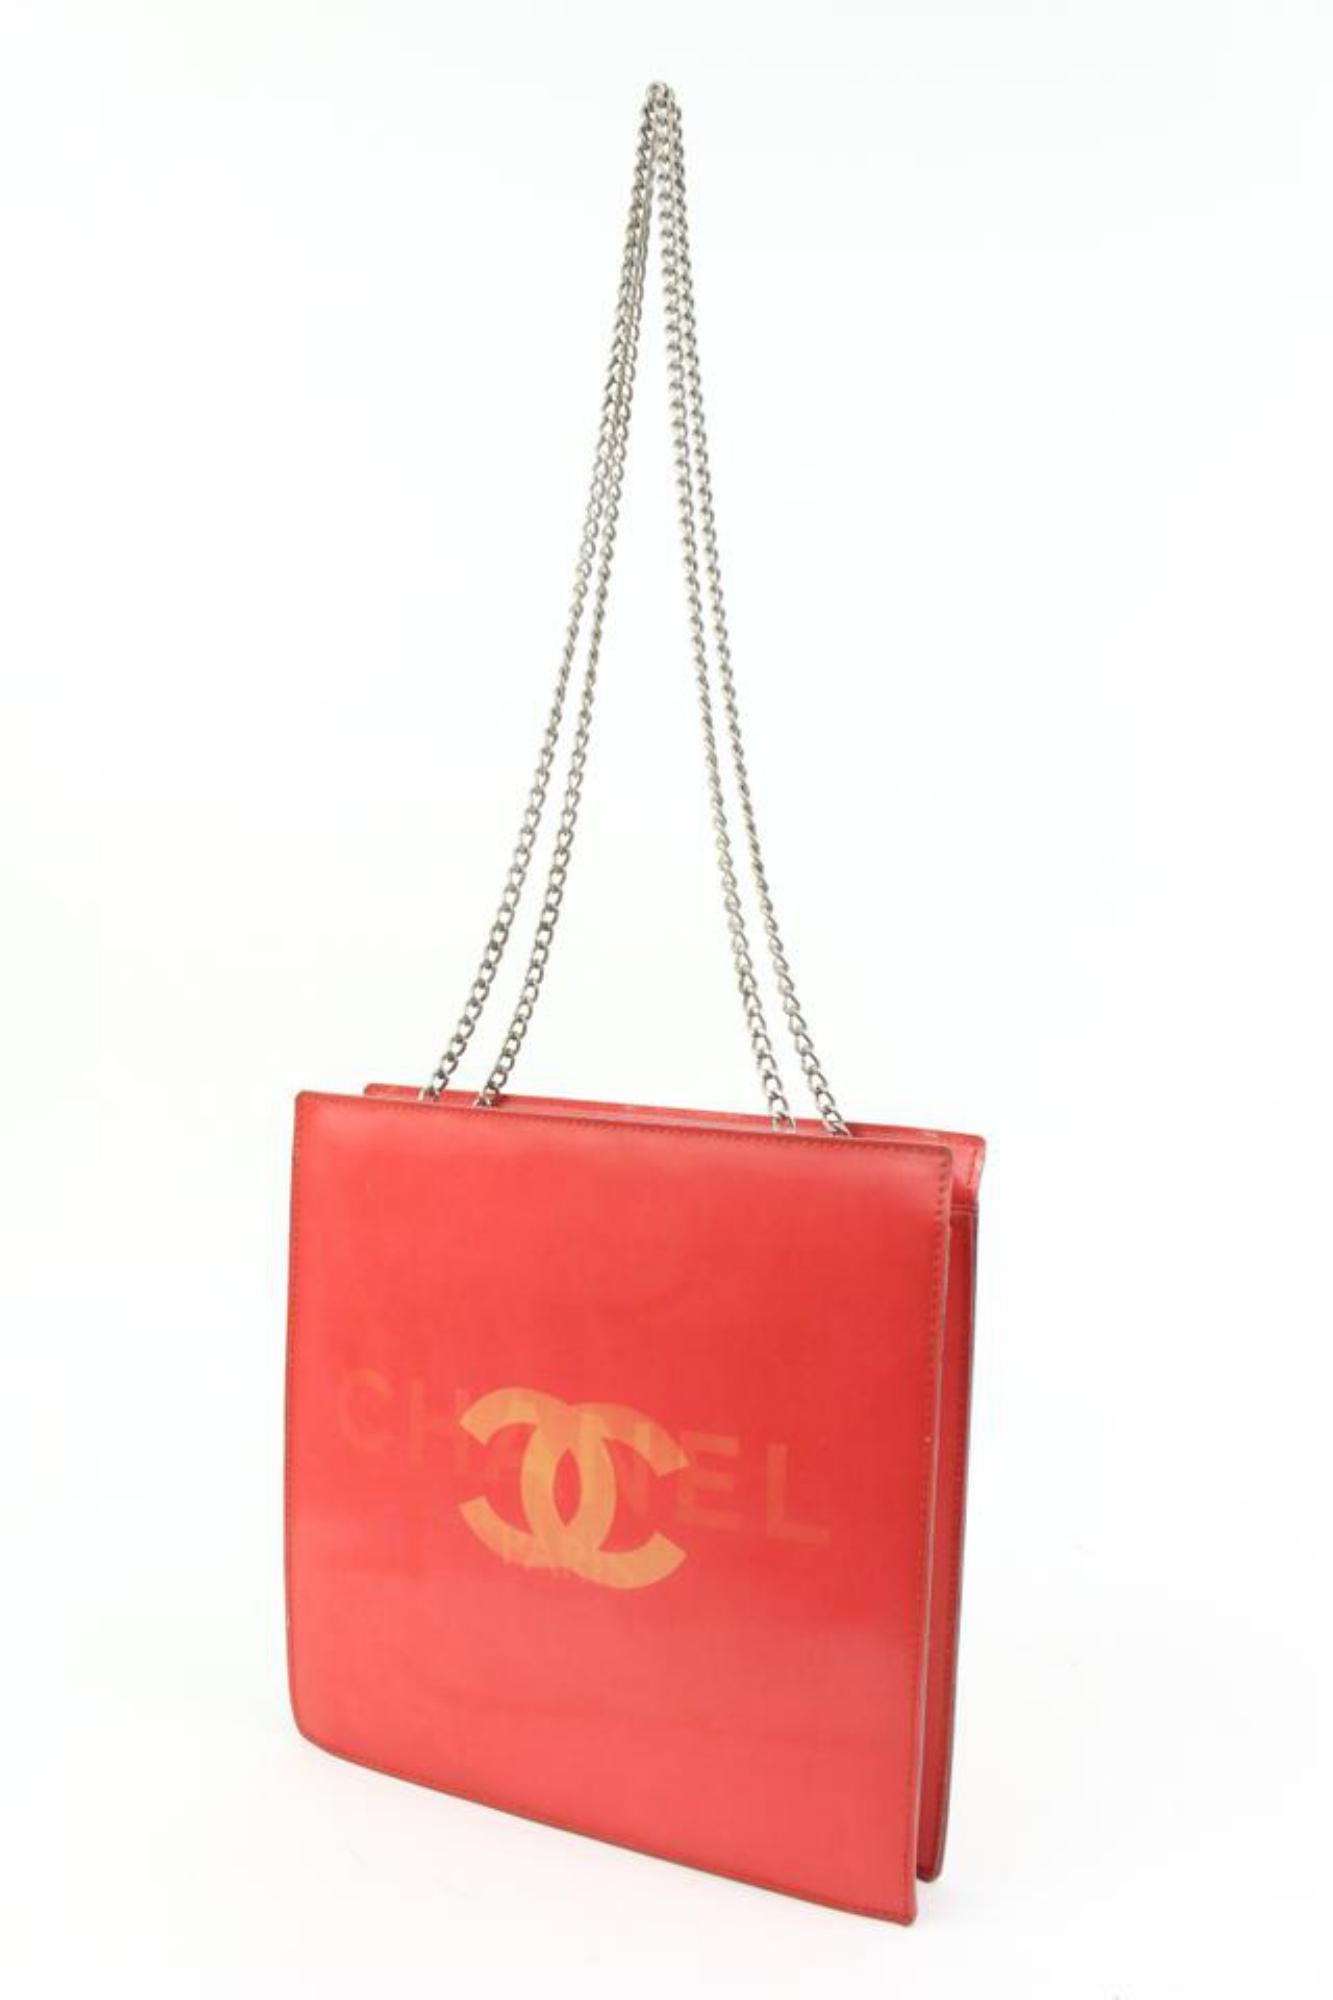 Chanel Red Holographic CC Logo Chain Tote Hologram Bag 4ck726a For Sale 3